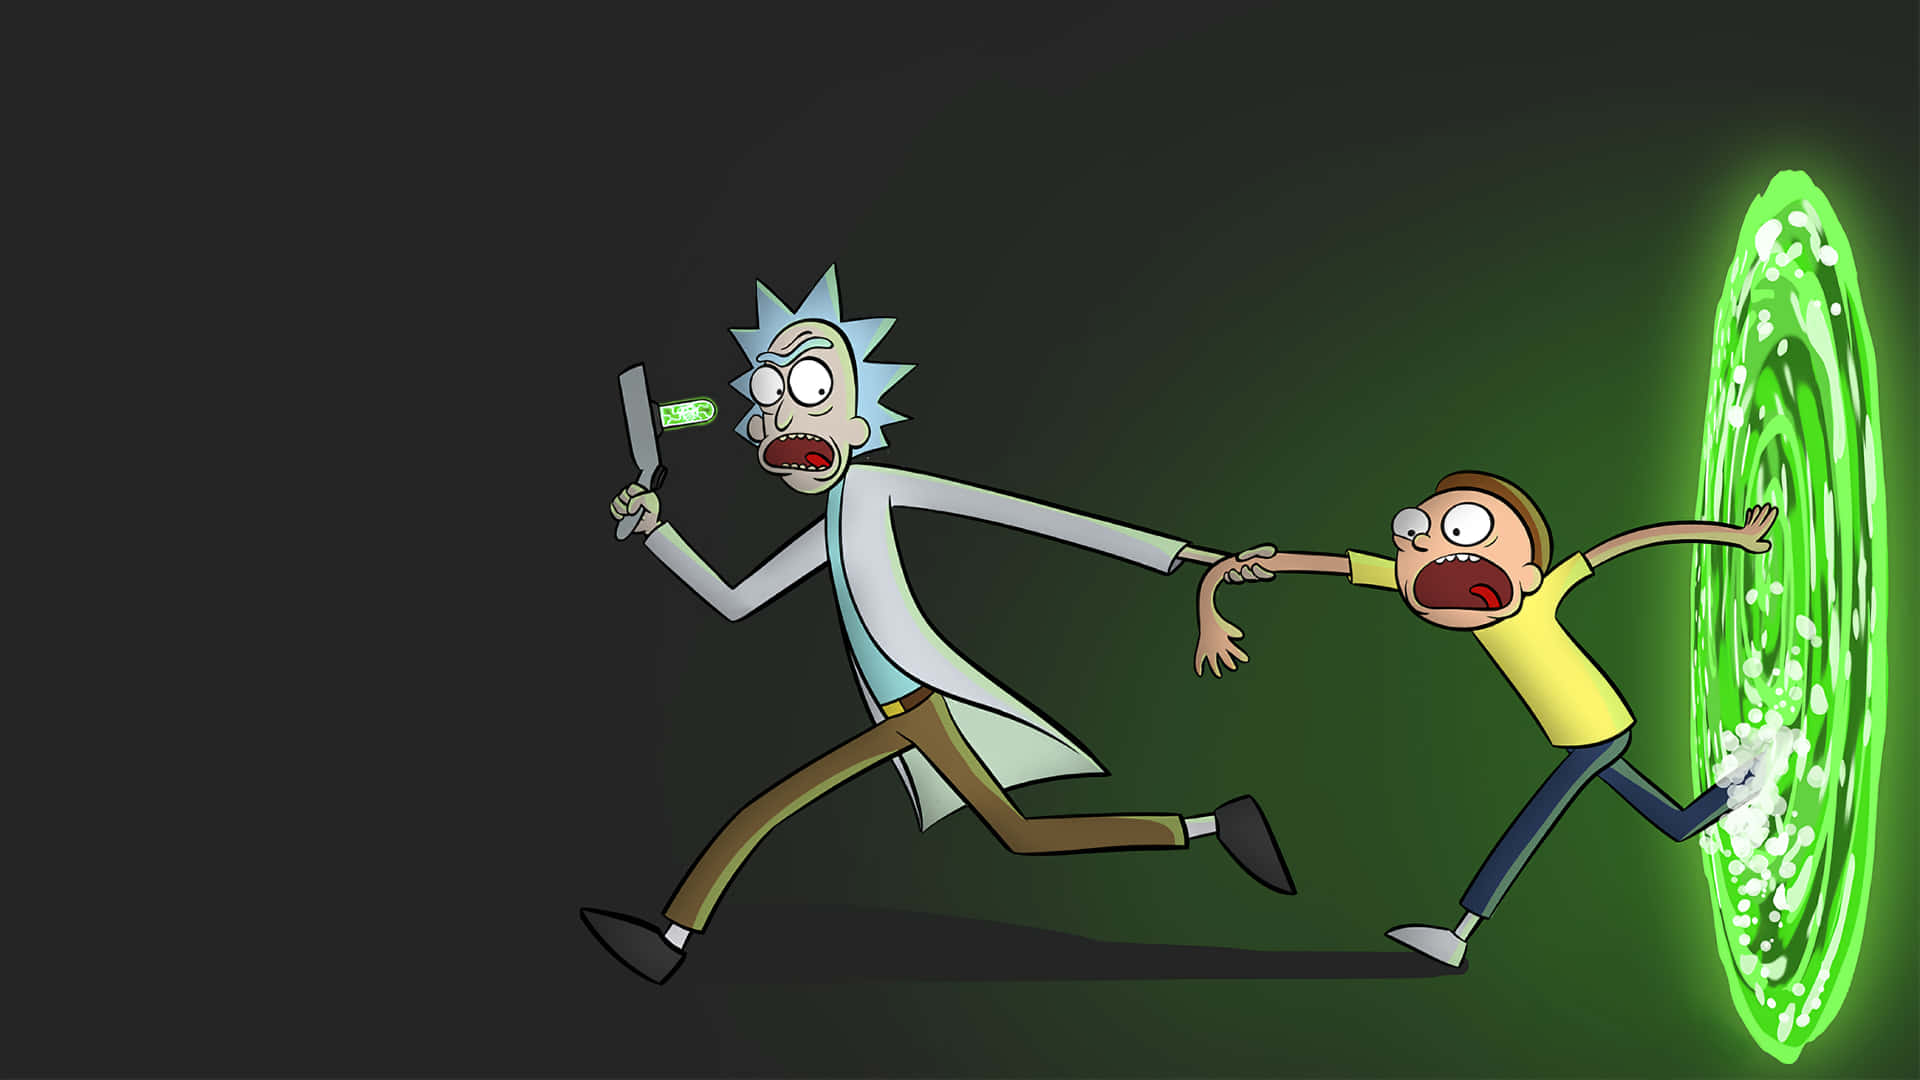 About: rick and morty portal wallpaper. (Google Play version